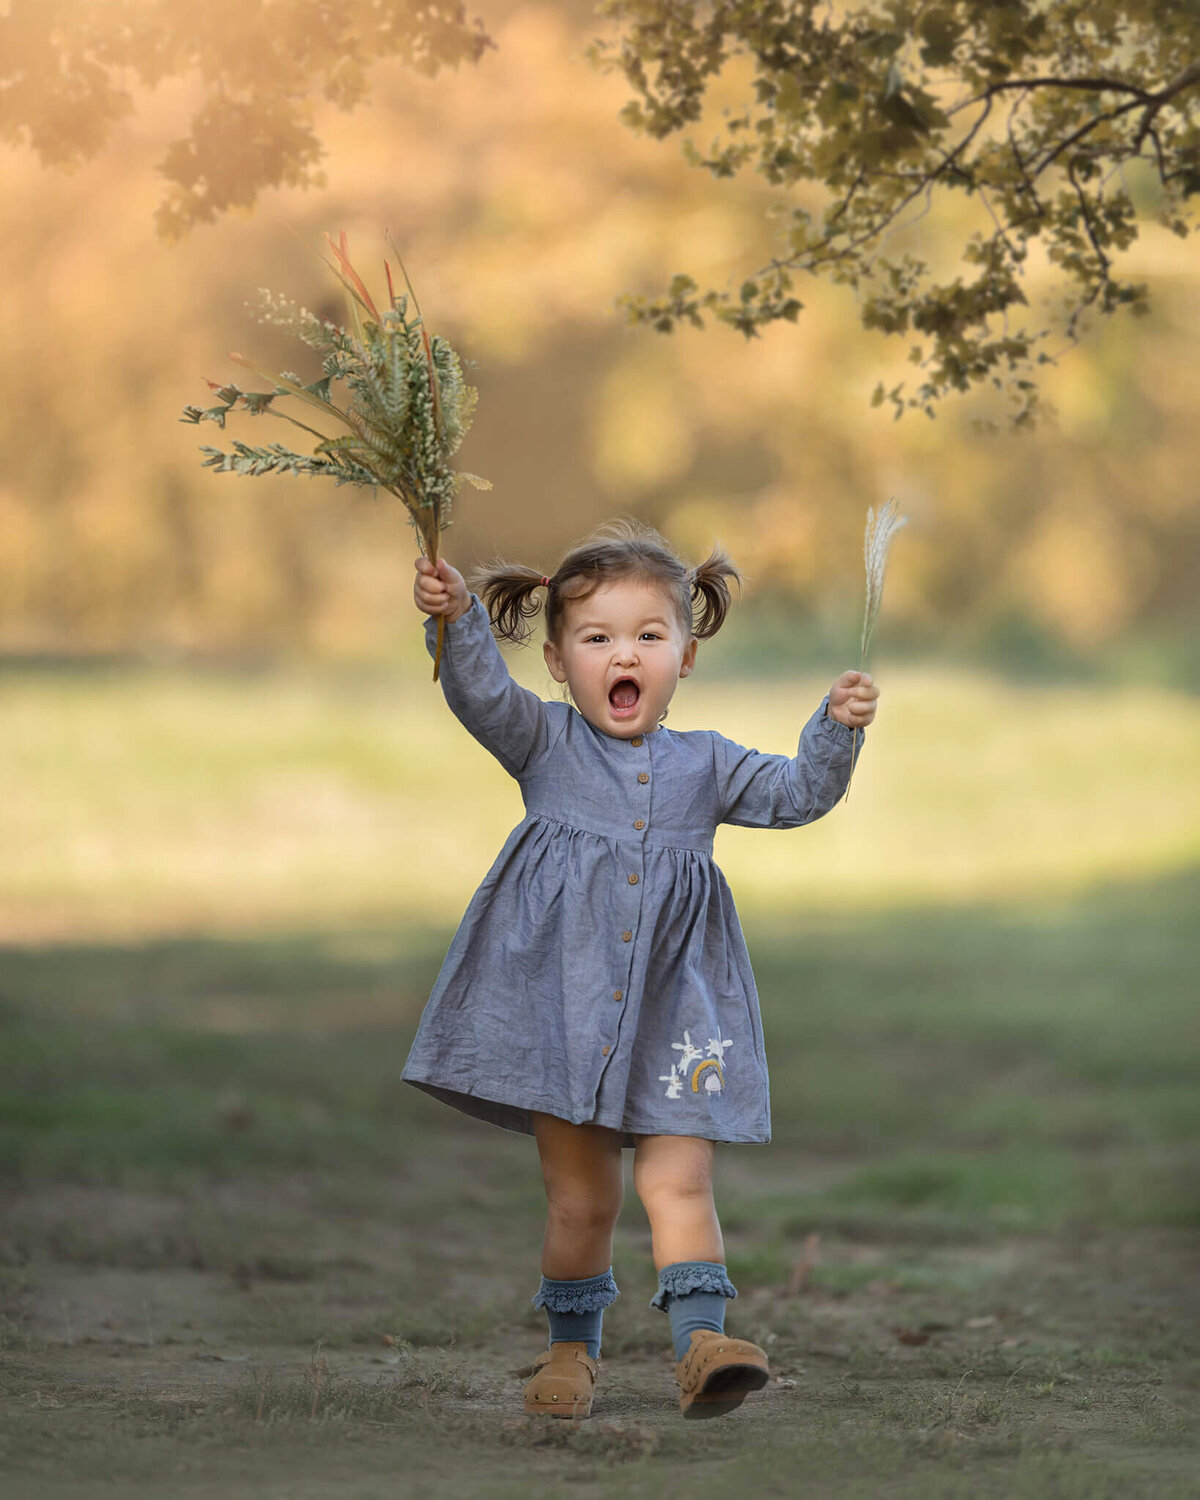 Little girl holding flowers and laughing runnign towards the camera - Los Angeles Children’s Photographer